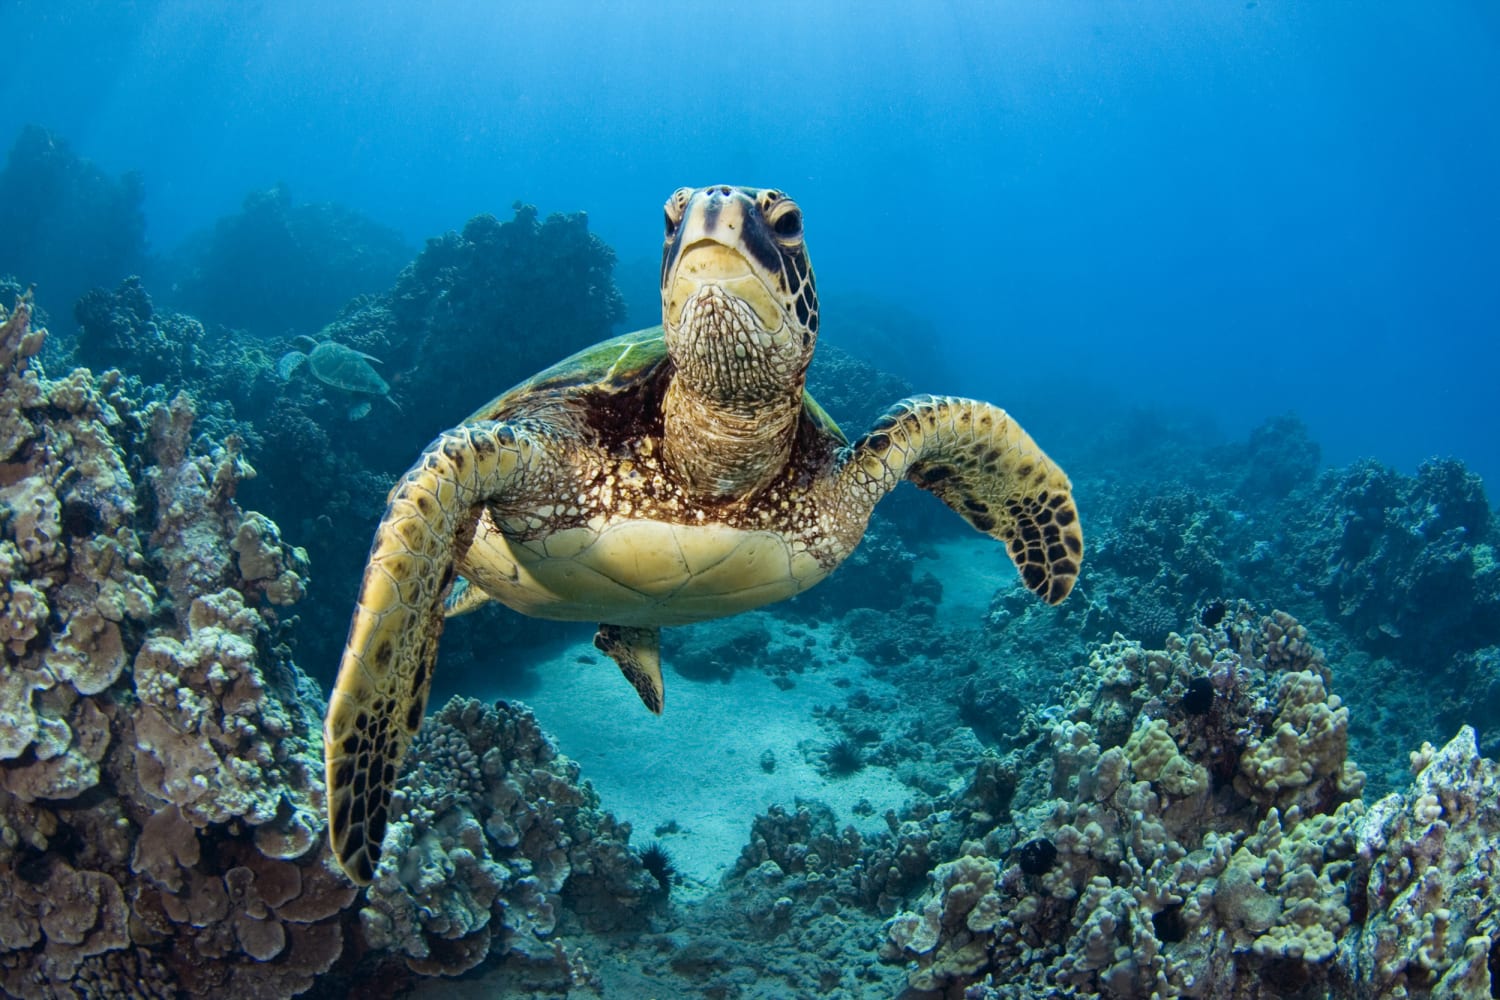 Sea turtle survey shows the endangered animals are making a comeback